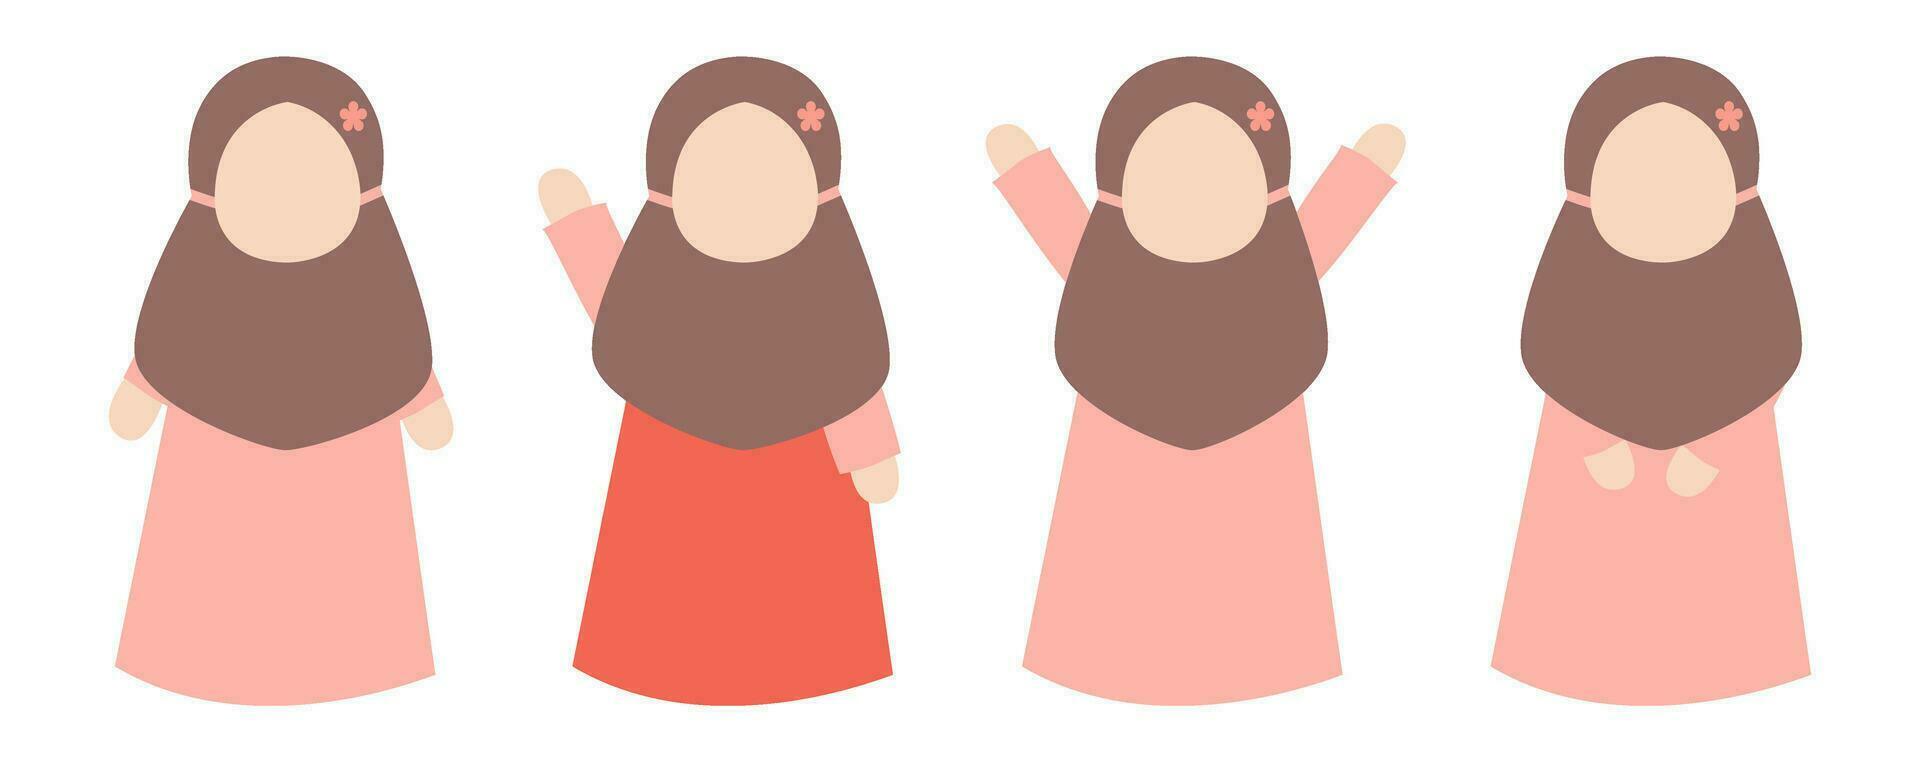 A collection of Muslim children's hijab characters vector